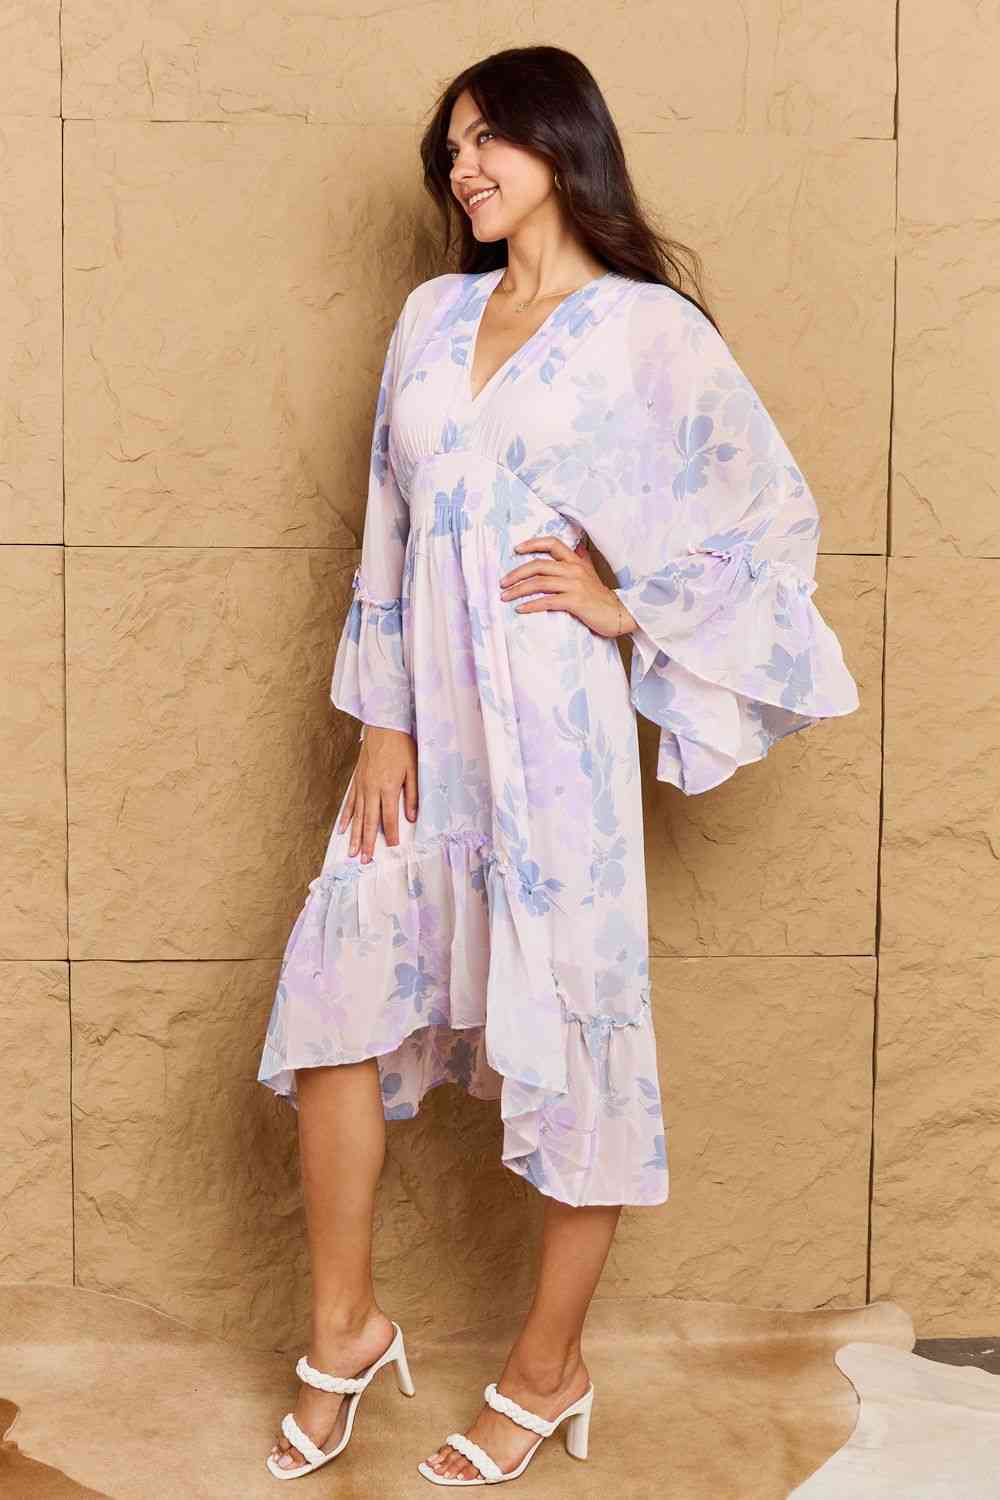 Take Me With You Floral Bell Sleeve Midi Dress in Blue - All Dresses - Dresses - 4 - 2024